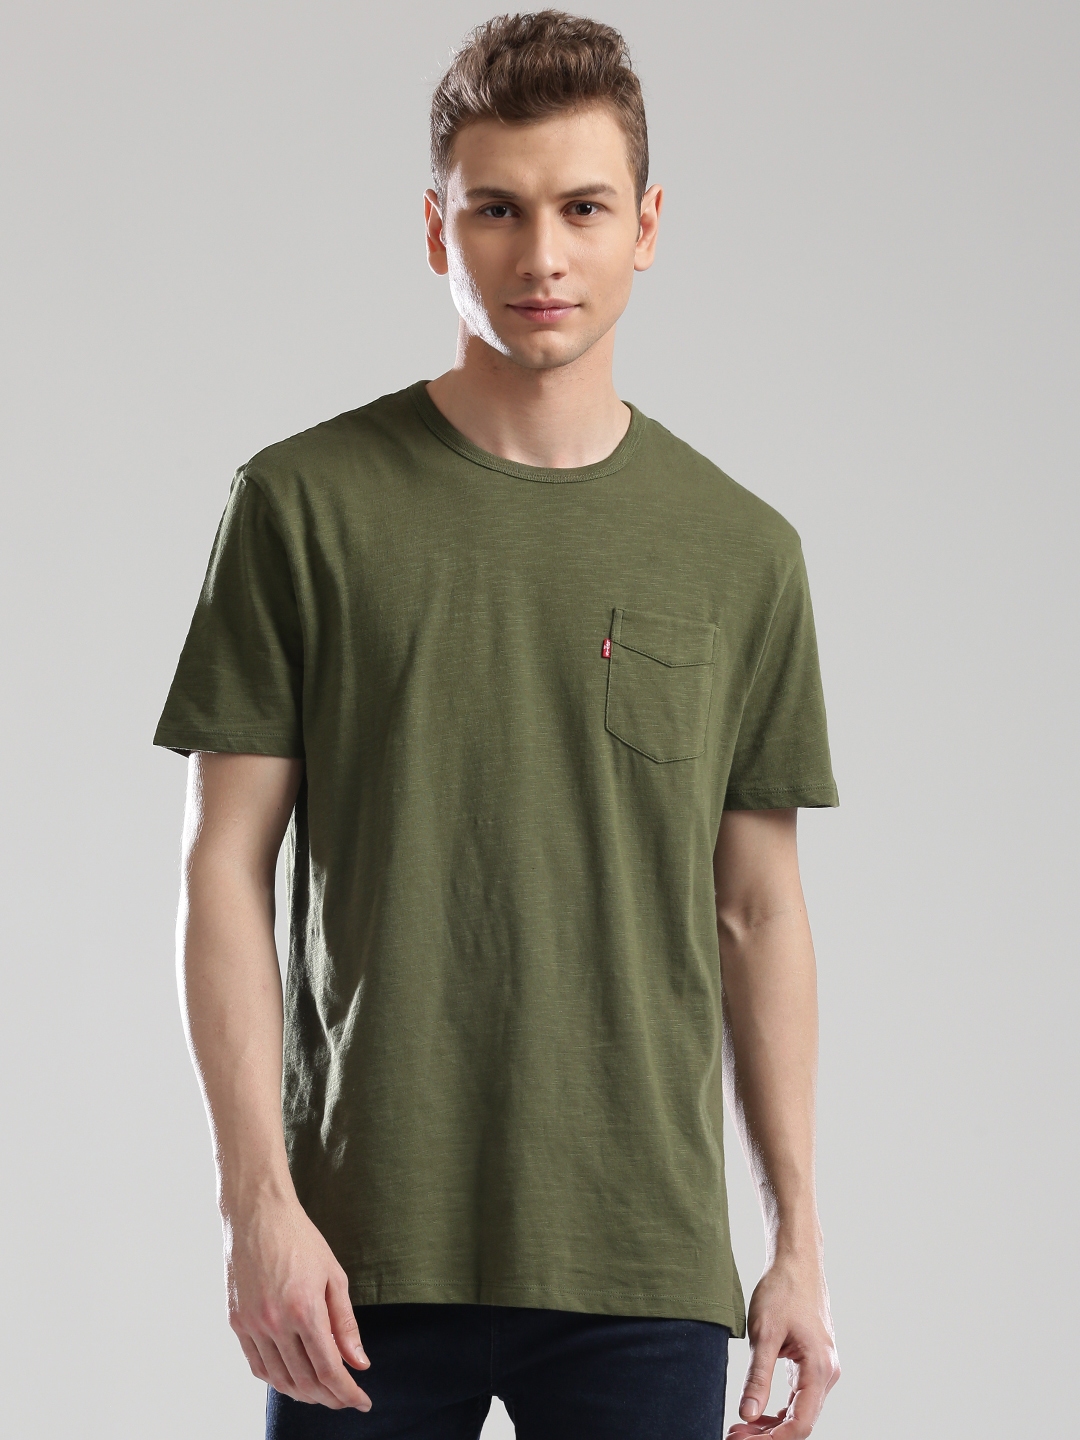 Buy Levis Olive Green Pure Cotton T Shirt - Tshirts for Men 1424143 | Myntra